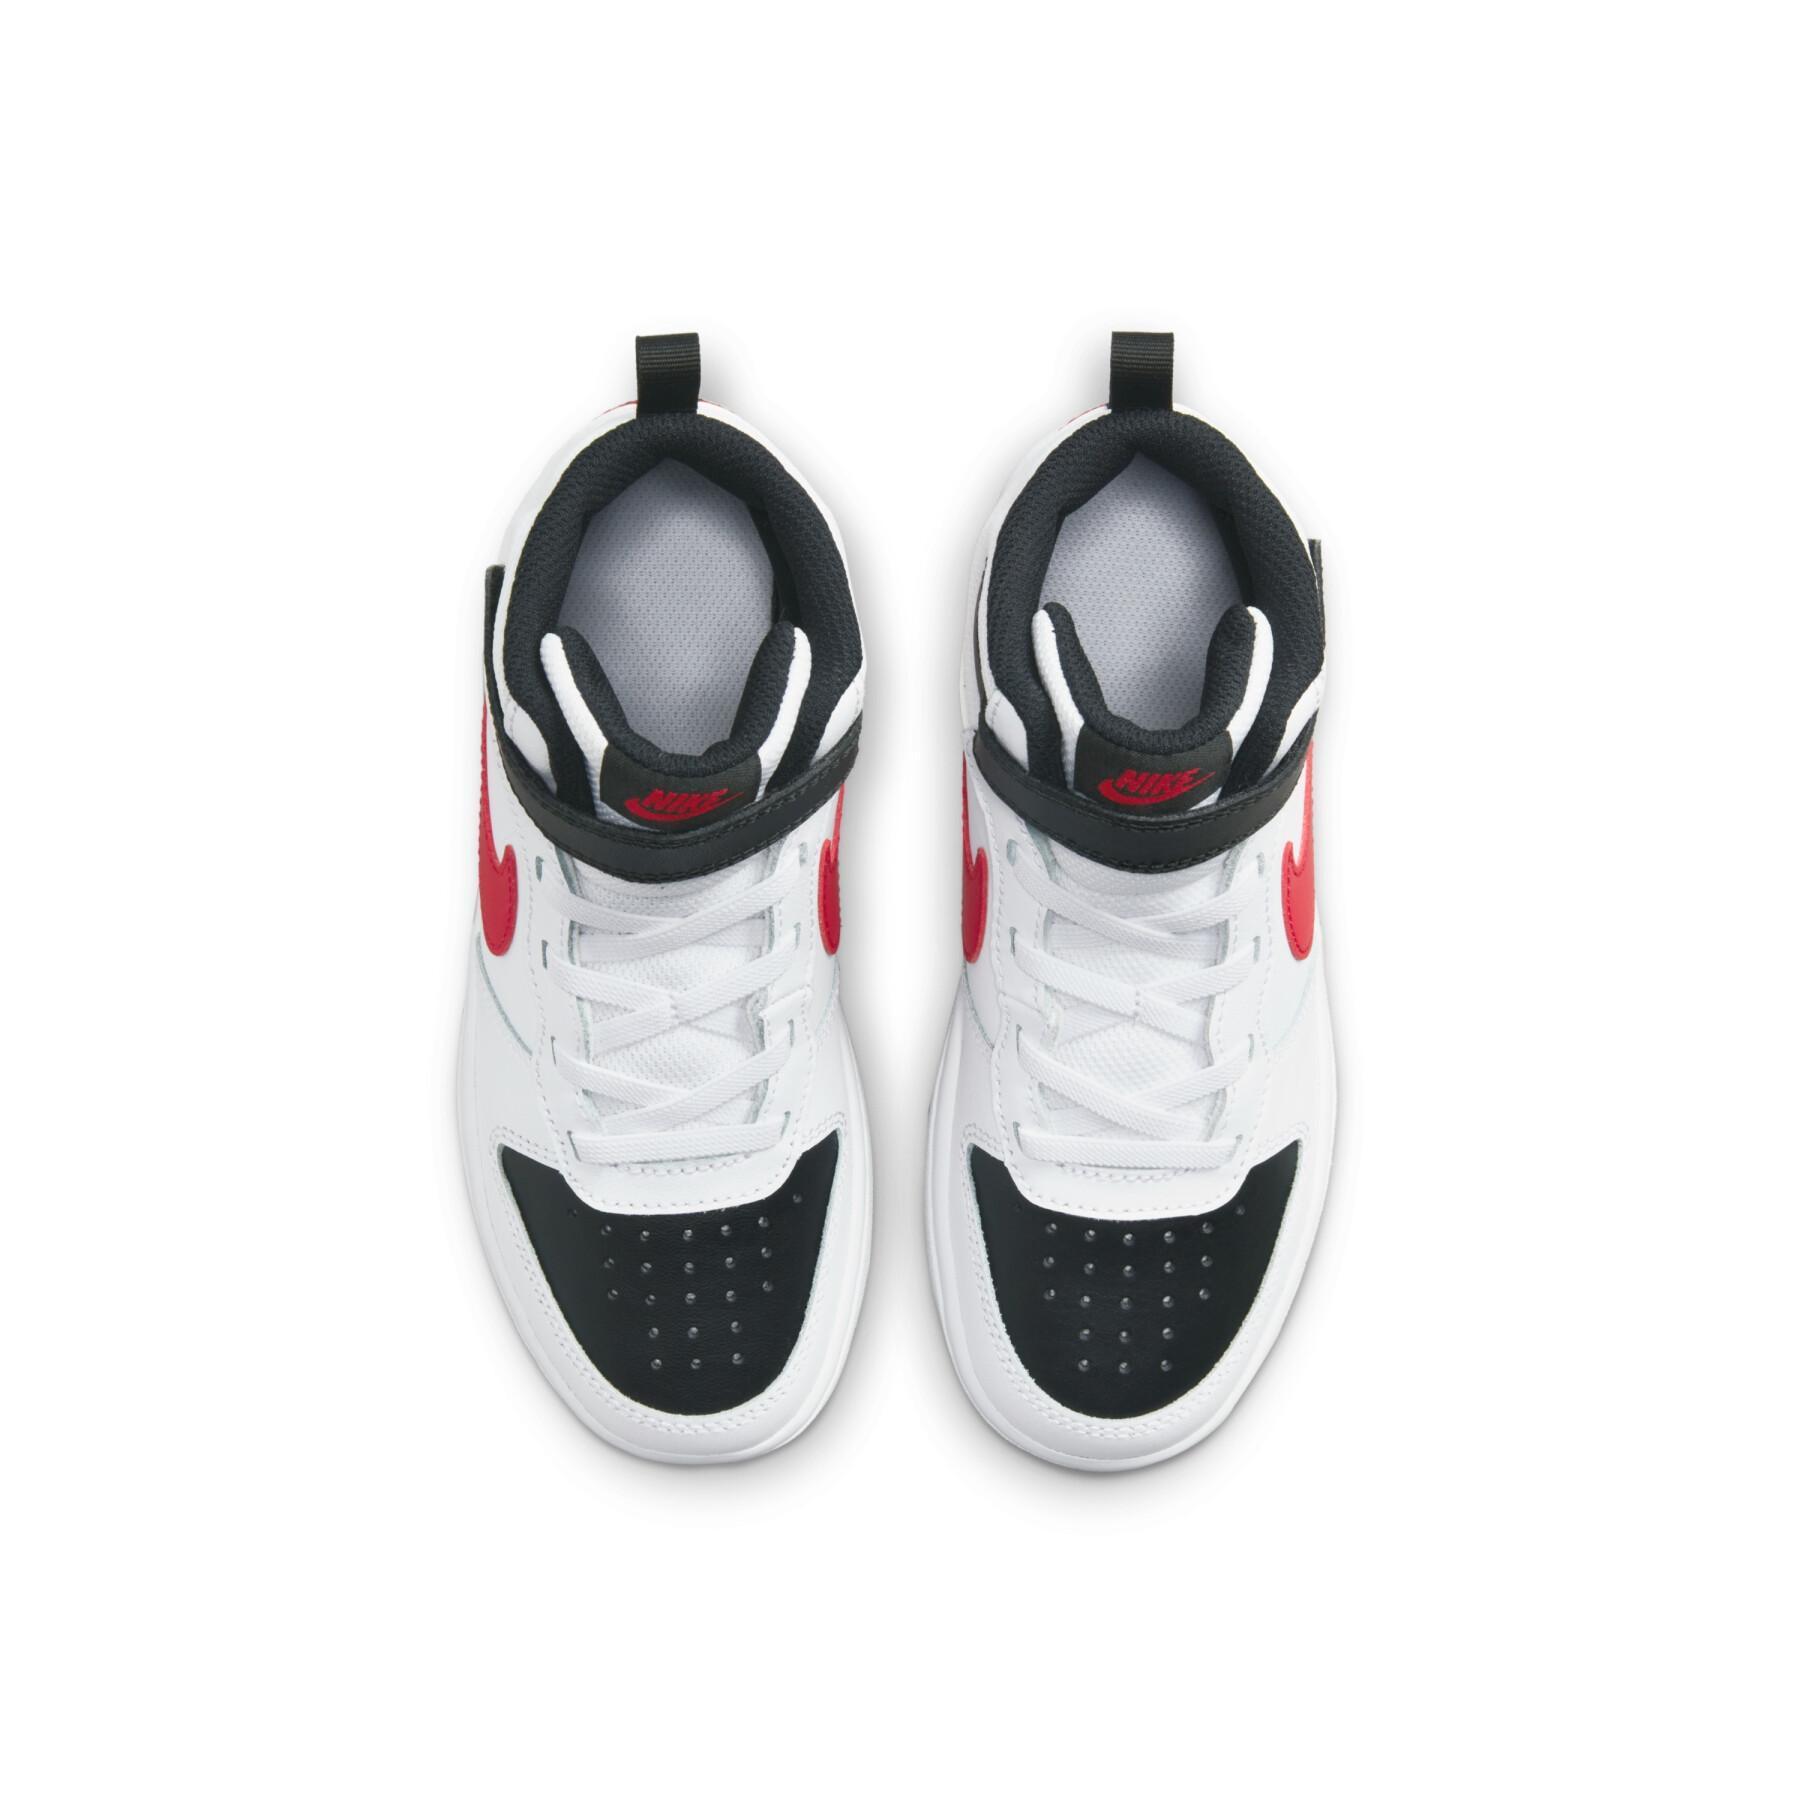 Mid-top sneakers for kids Nike Court Borough 2